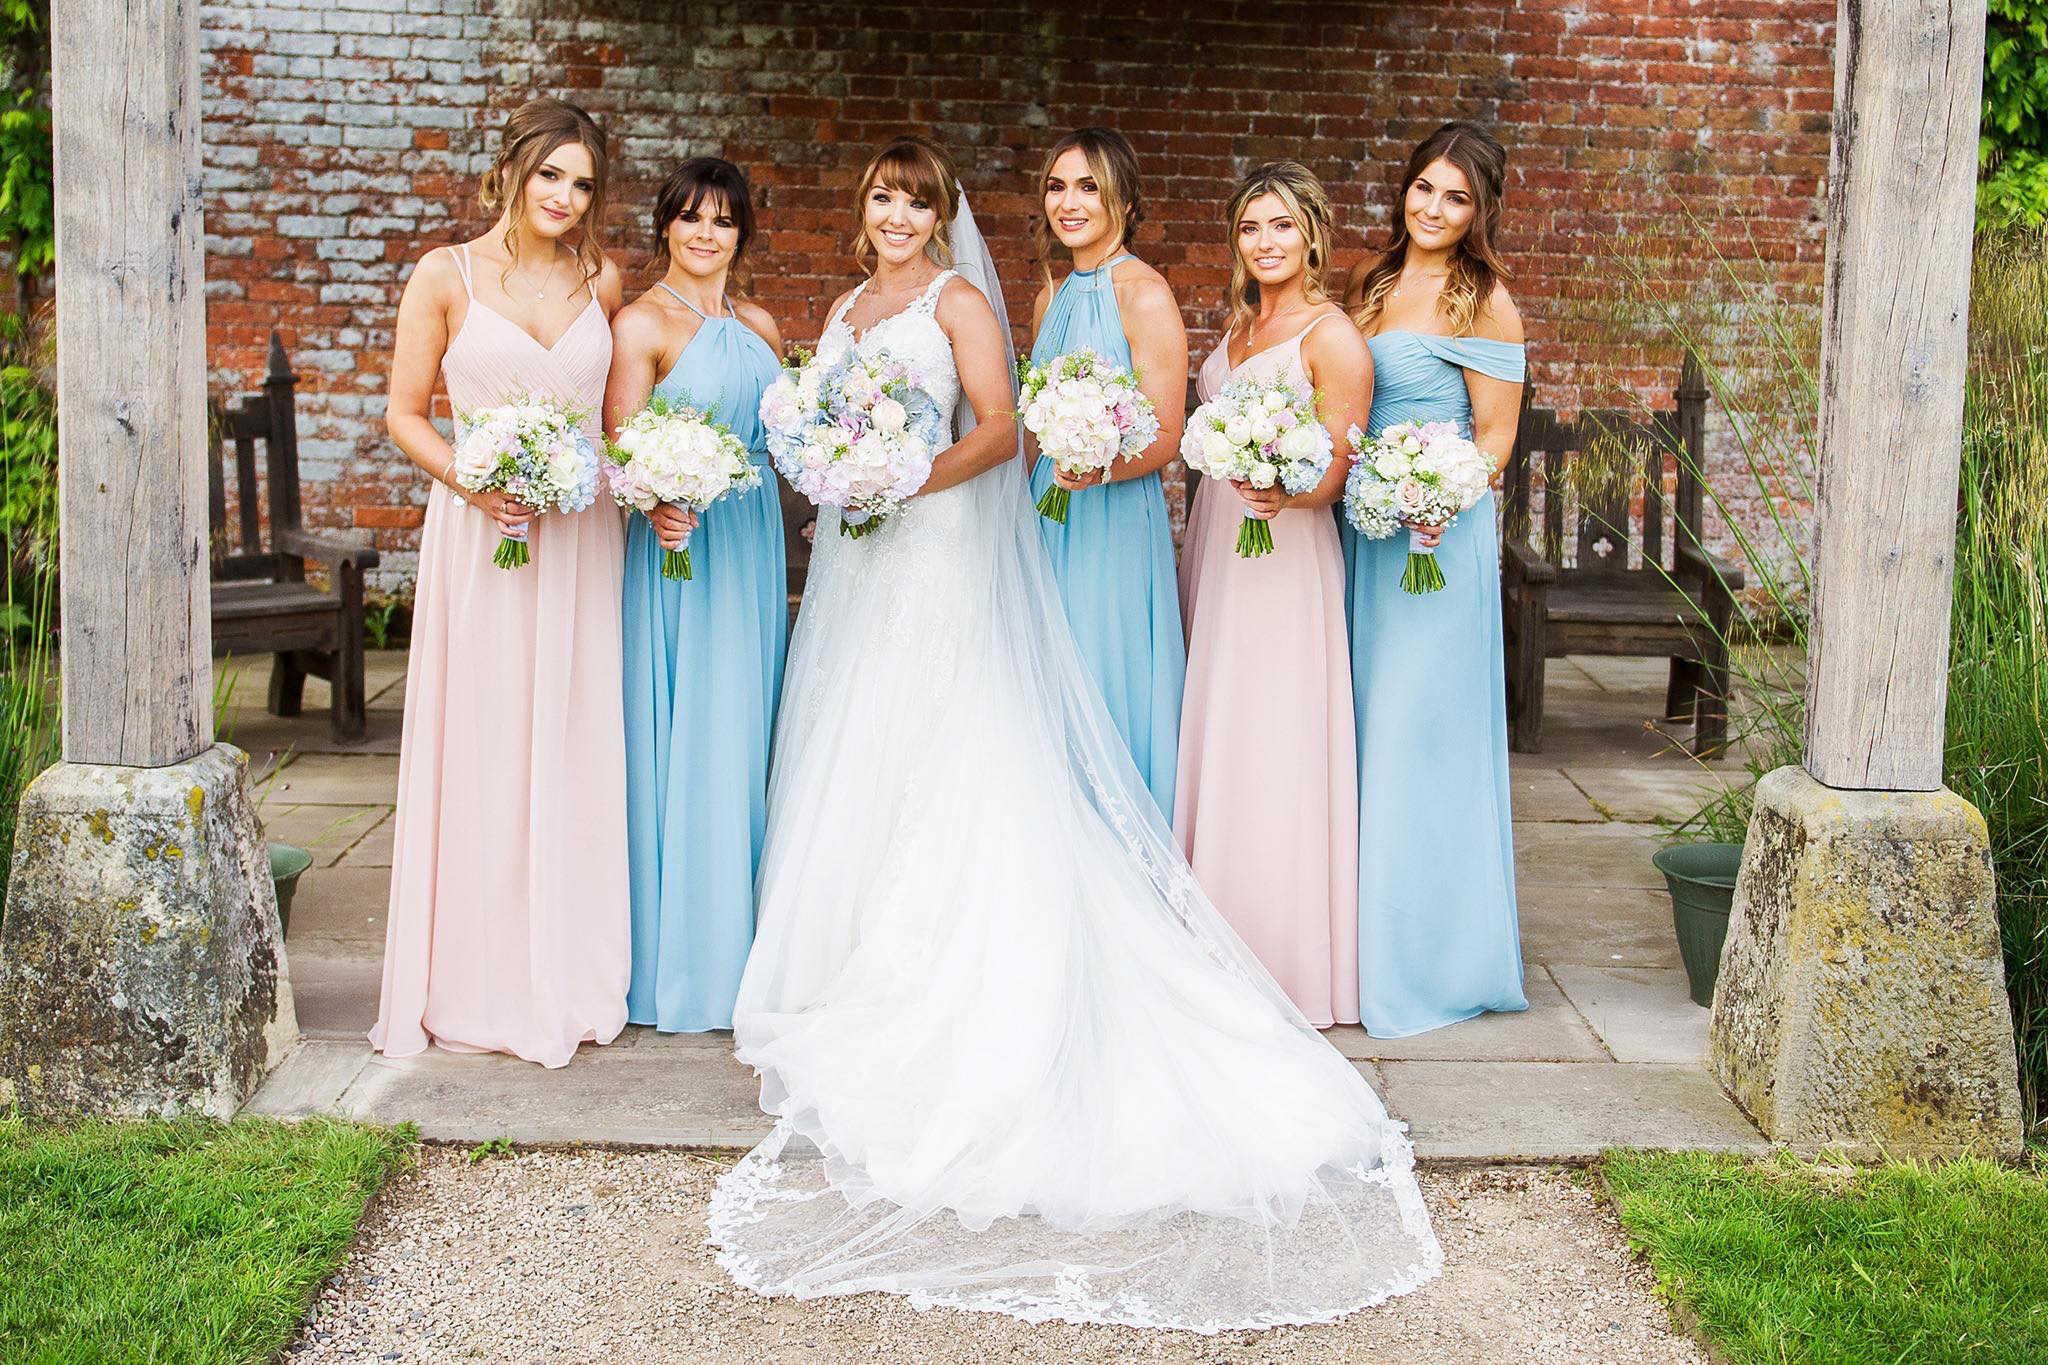 Bridal party outside holding bouquets of flowers